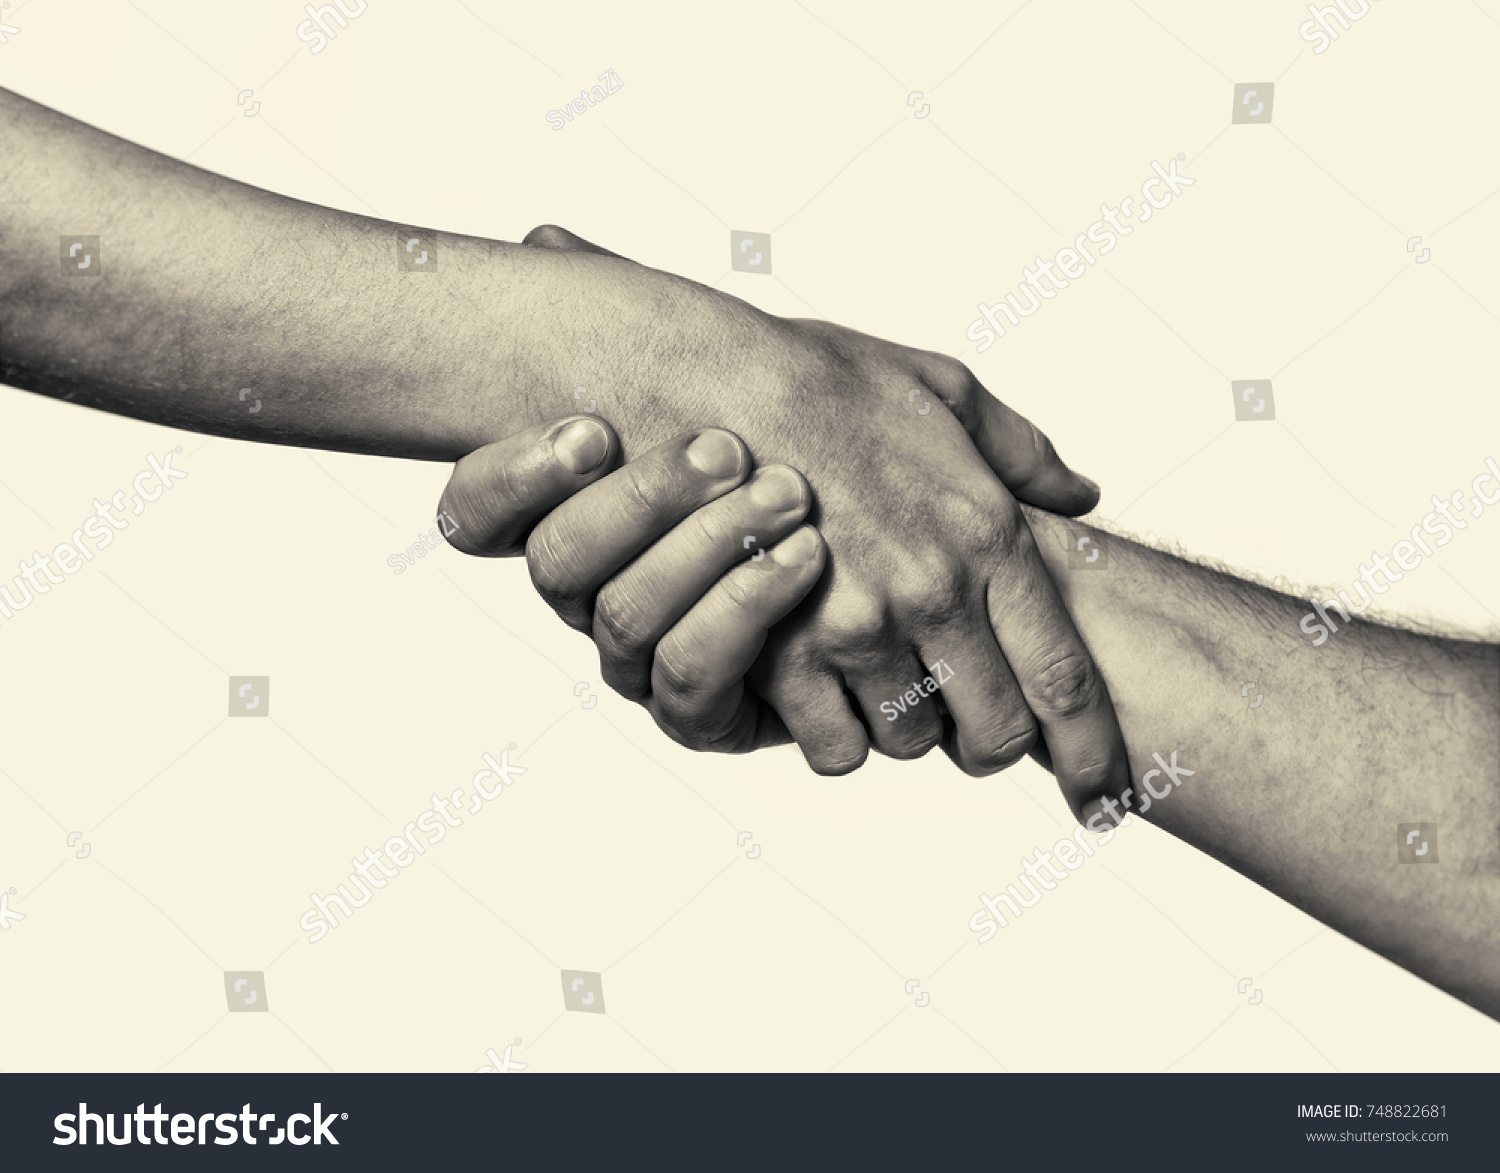 Concept of salvation. Black and white image of the hands of two people at the time of rescue (help). #748822681